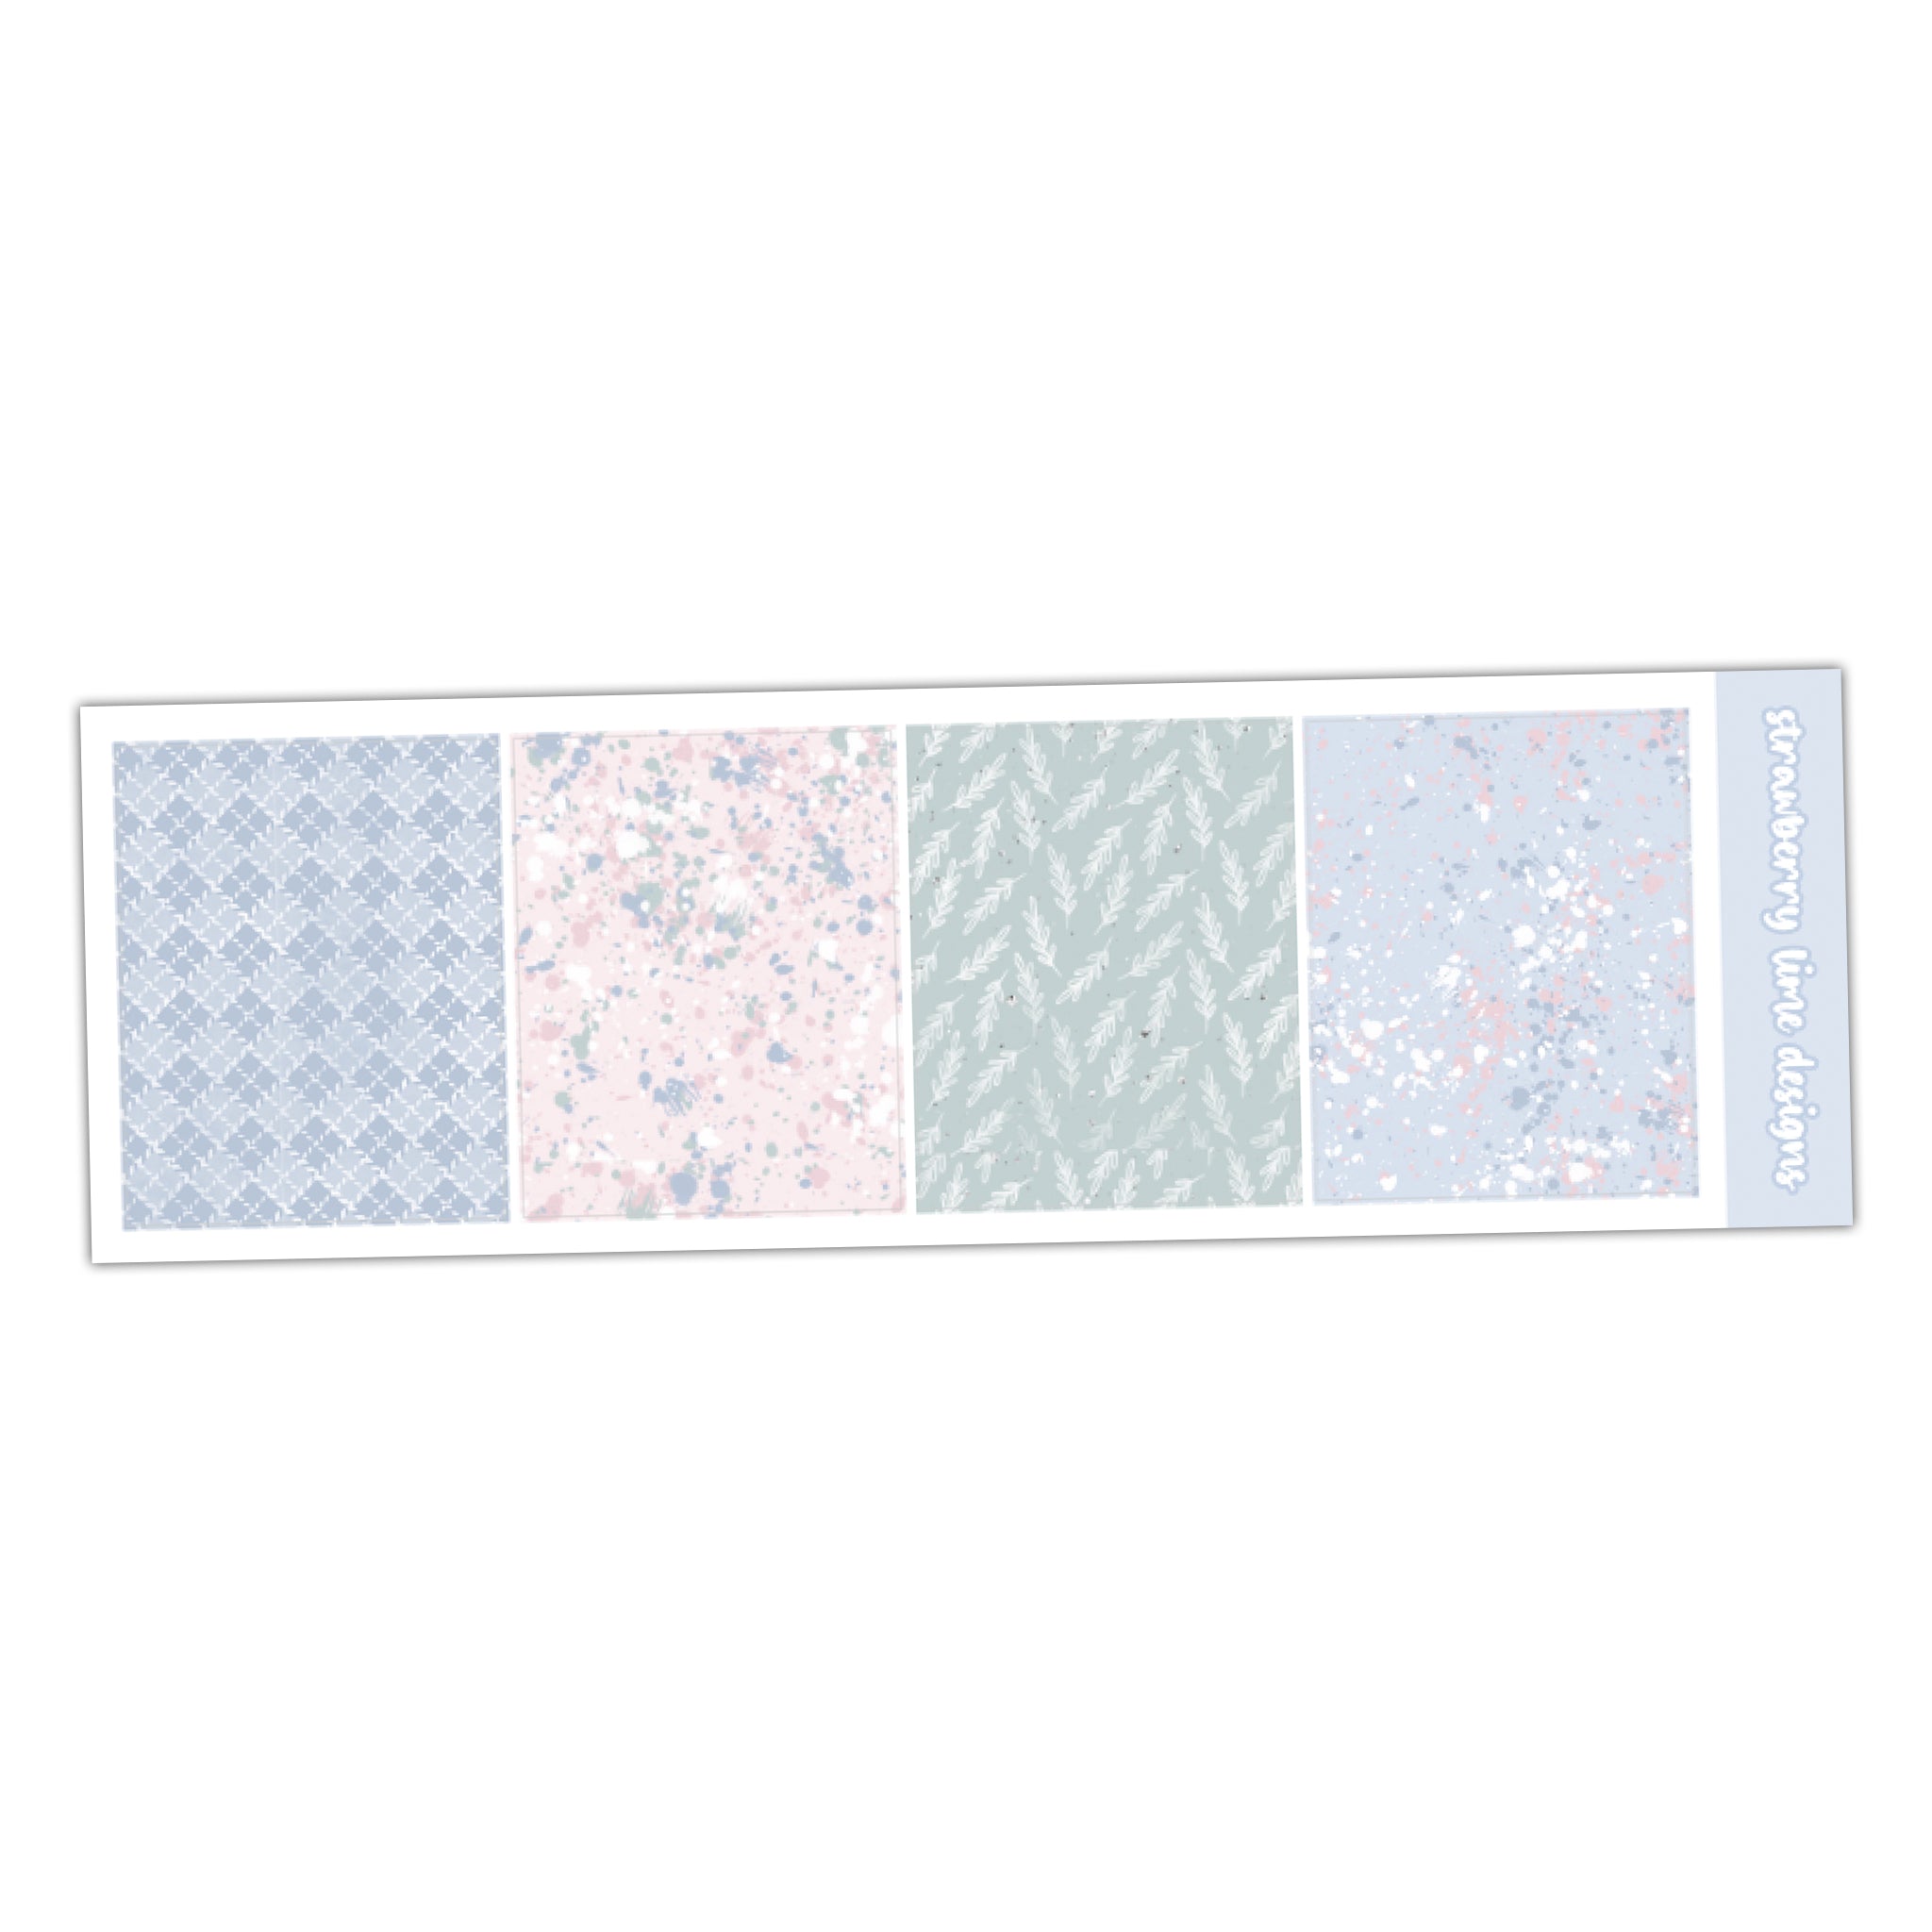 Frosty Patterned Full Boxes Add On